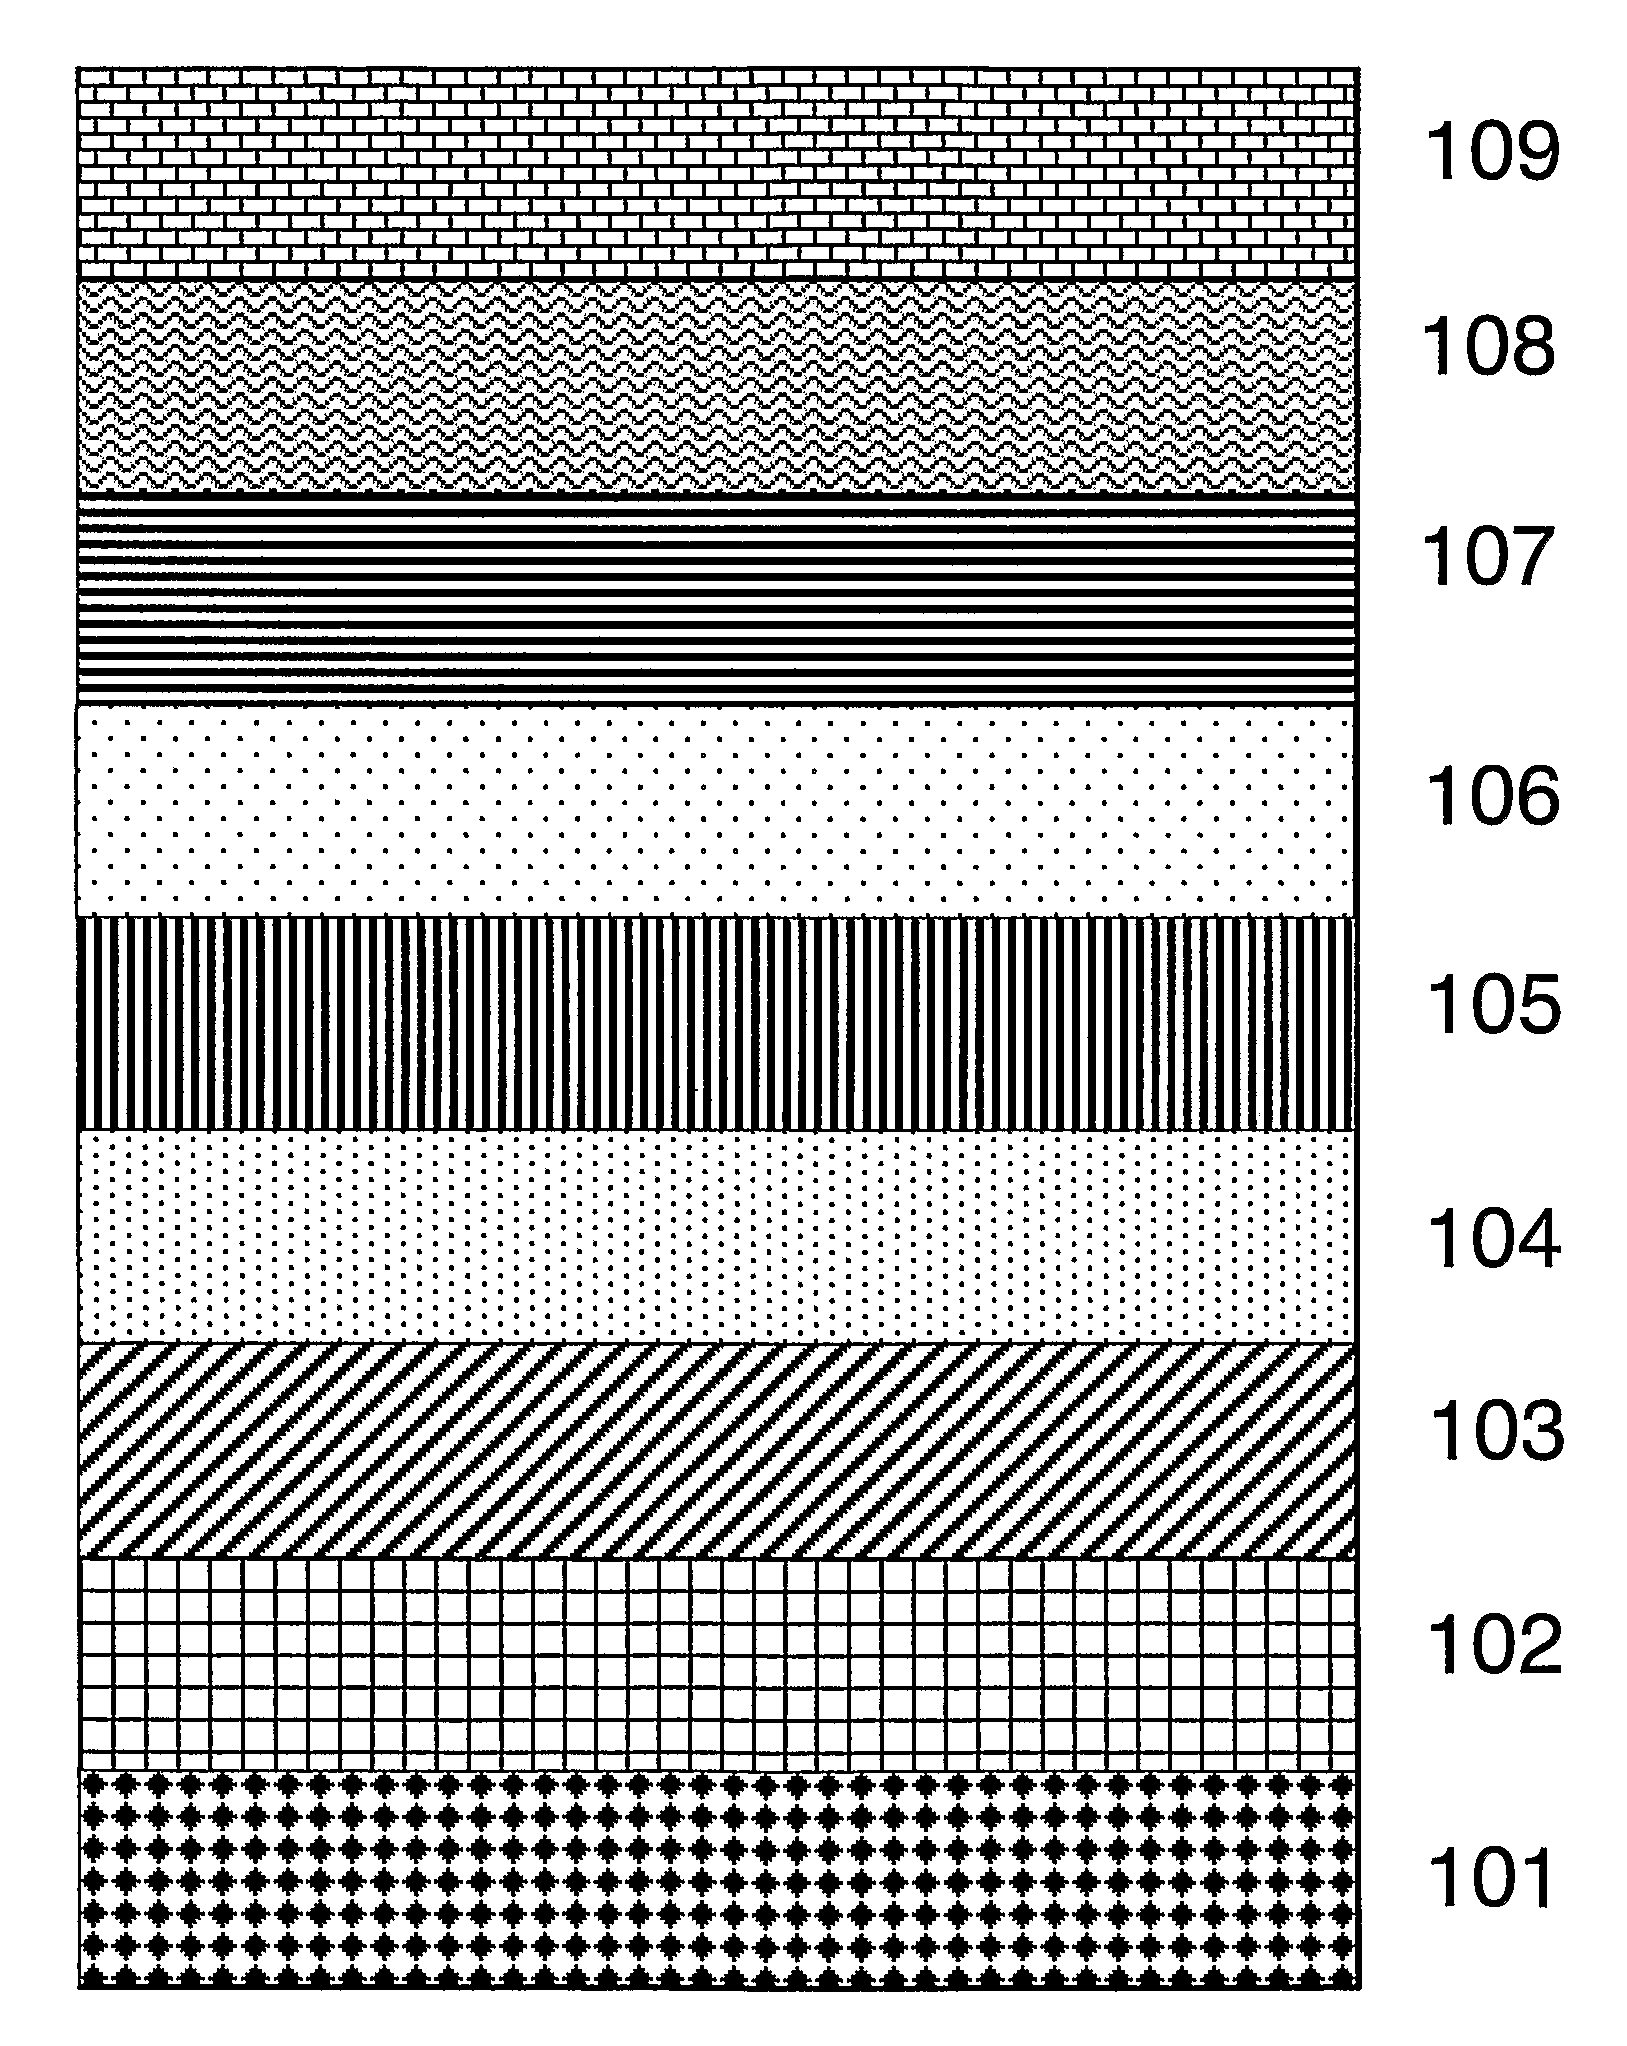 N-type group III nitride semiconductor stacked layer structure